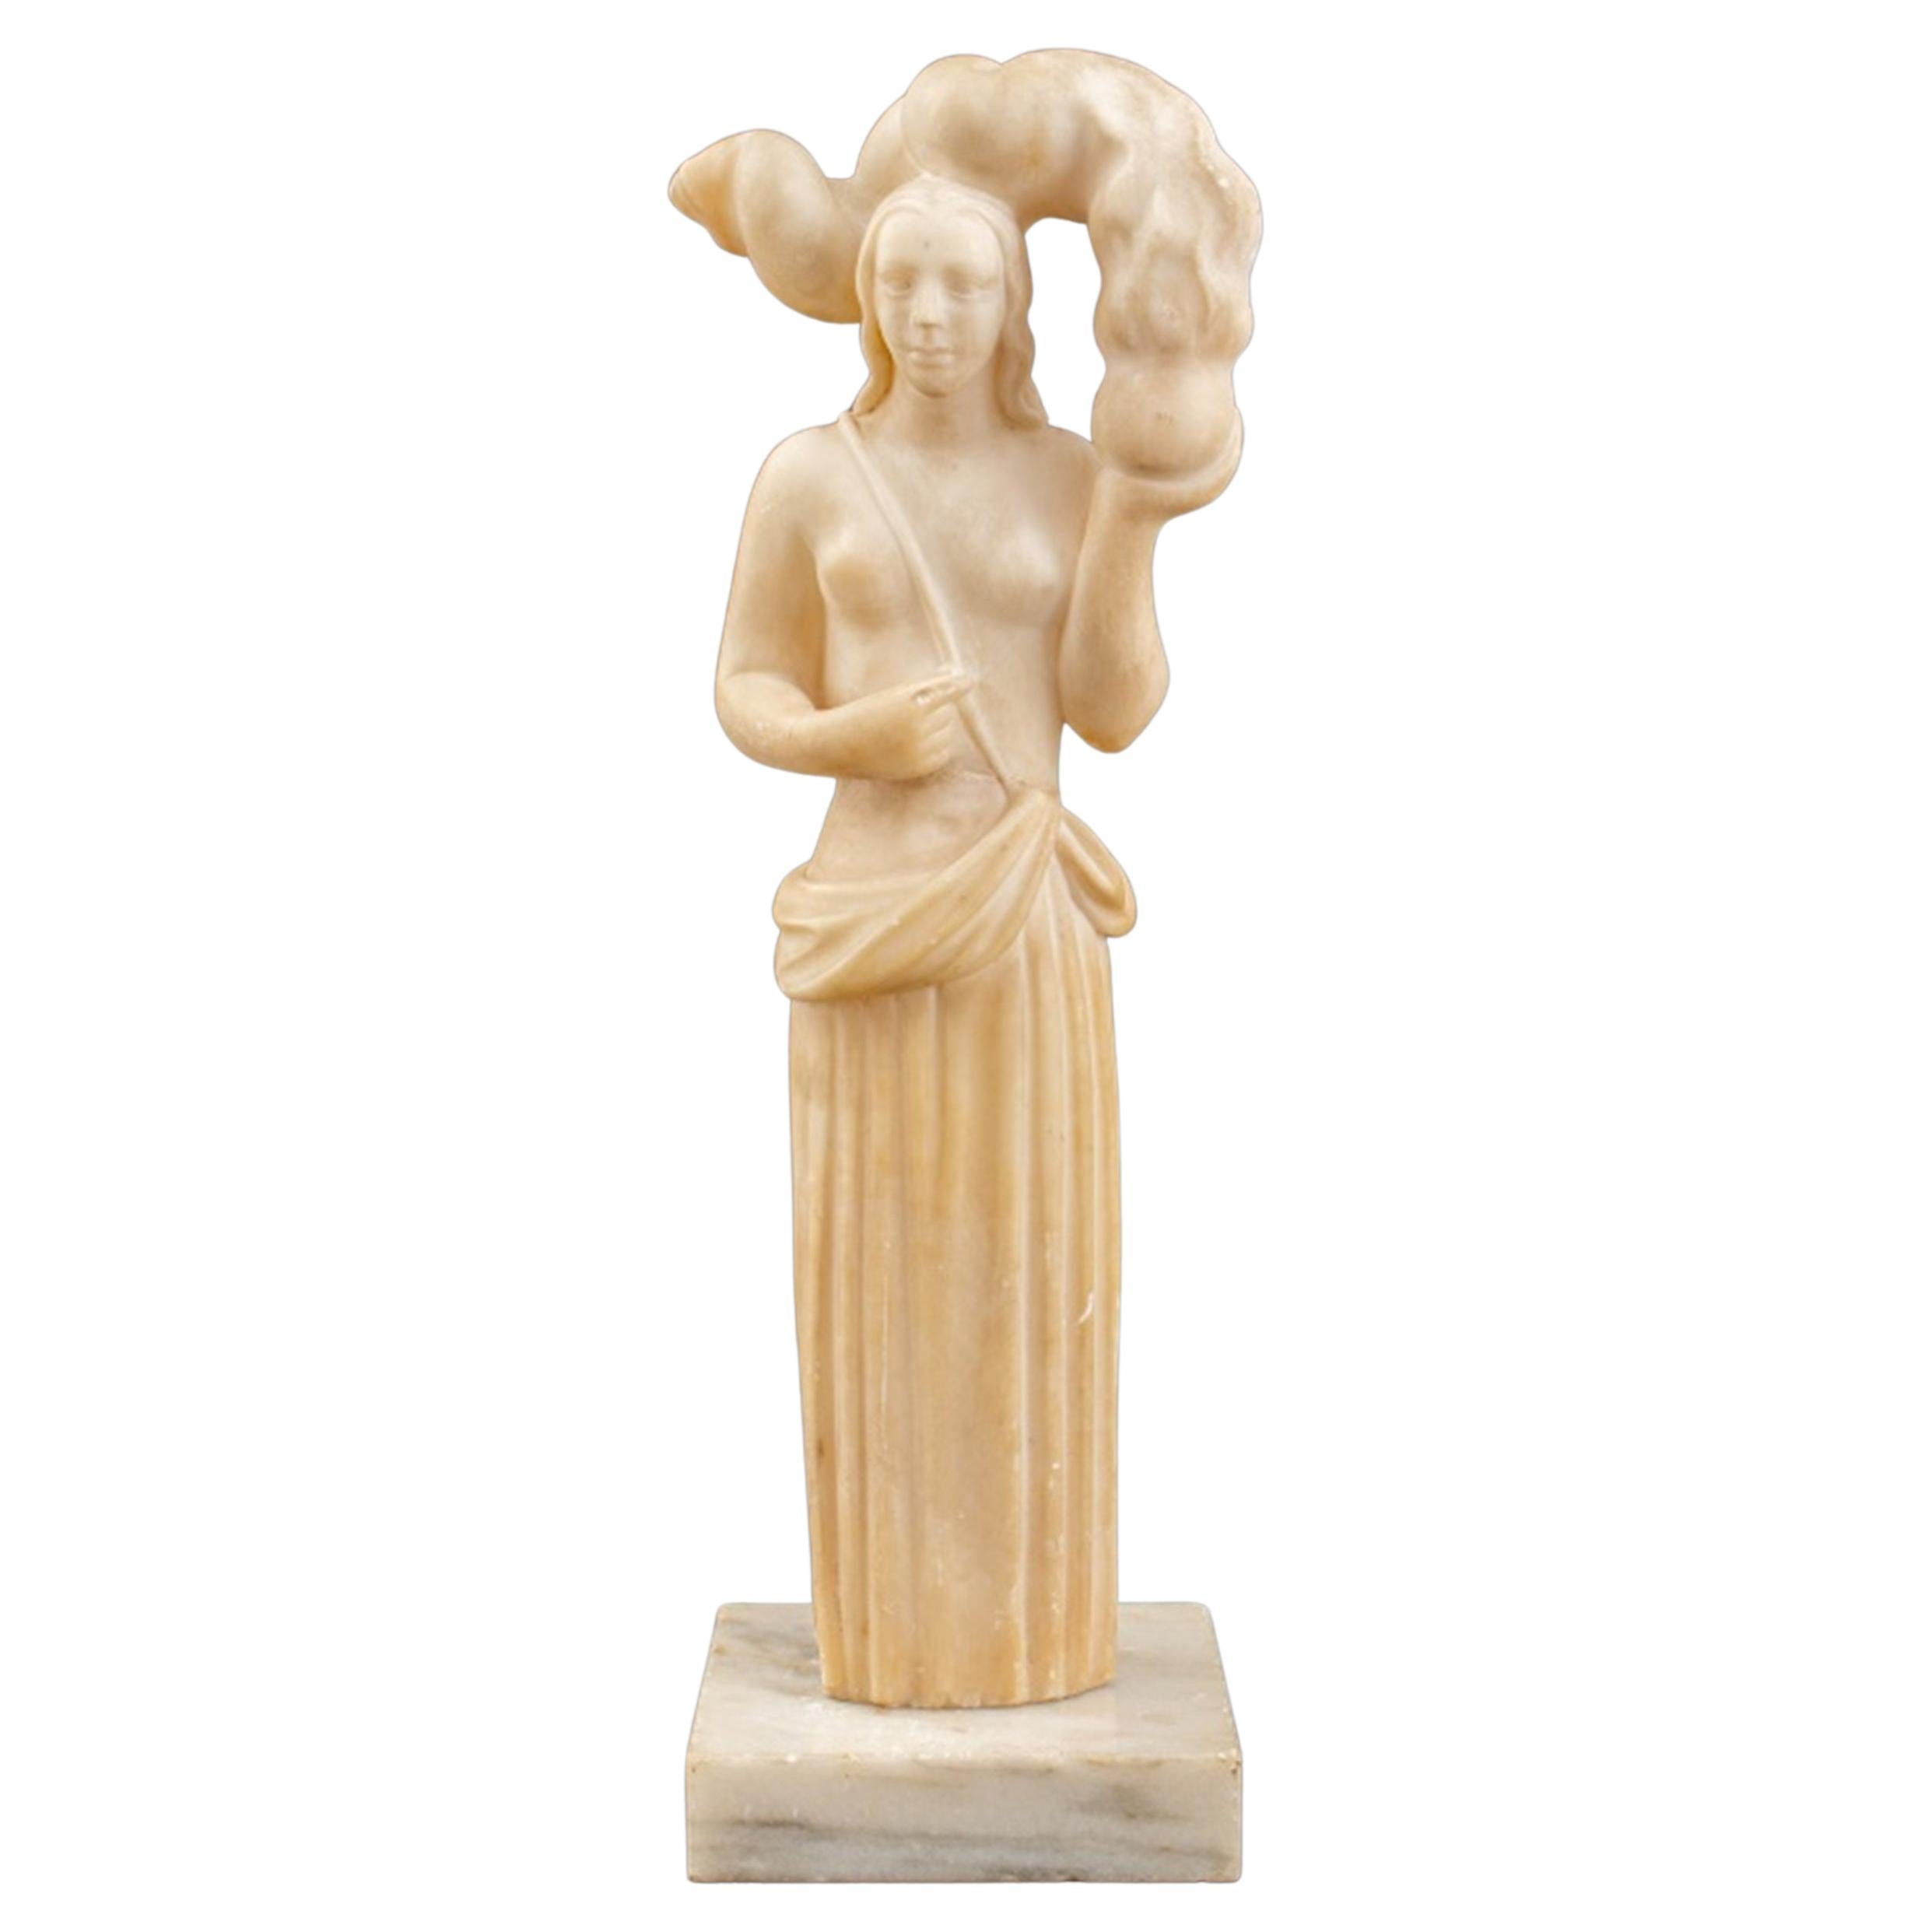 French Art Deco Nude Woman Alabaster Sculpture